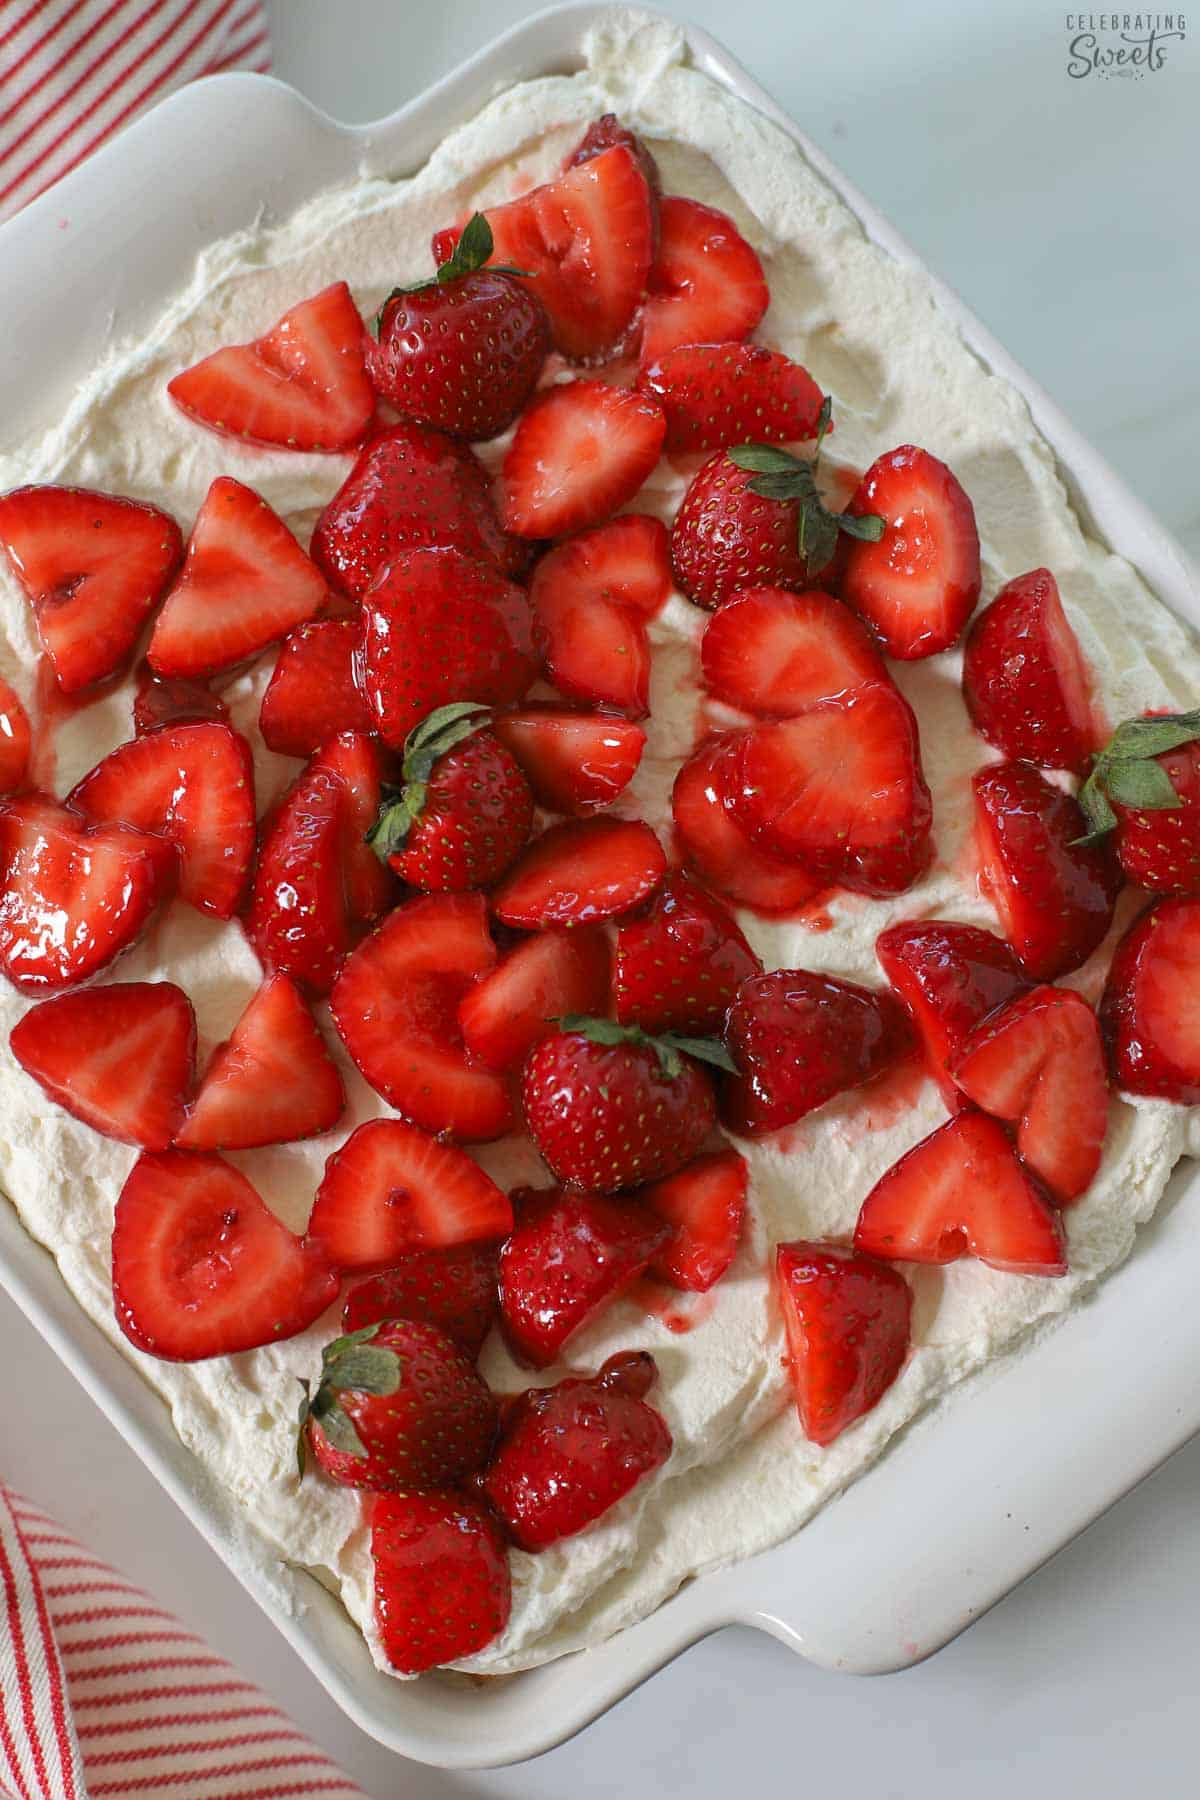 Strawberry icebox cake in a white baking dish next to a red and white striped napkin.